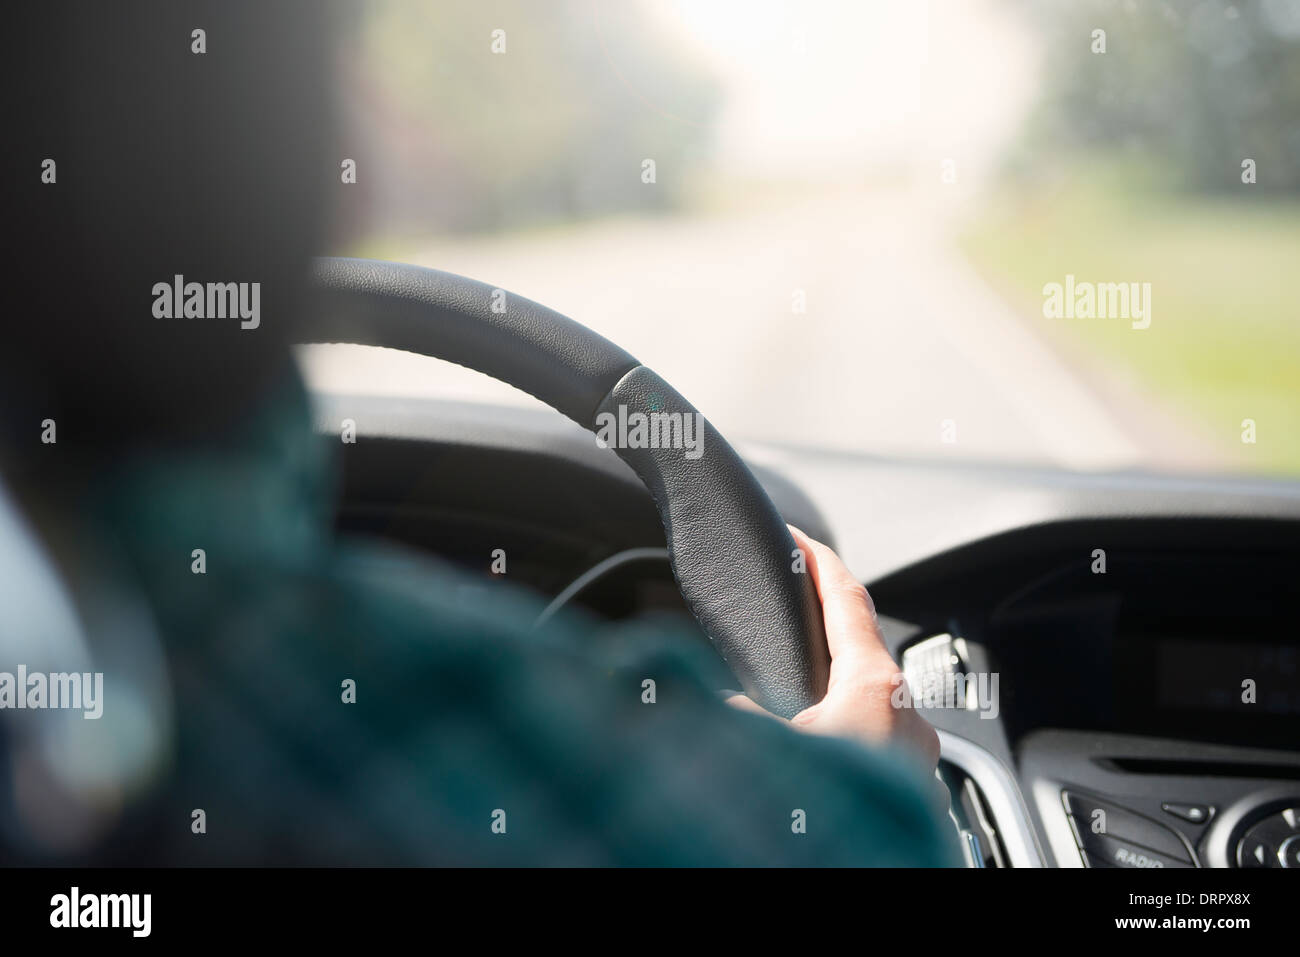 Person on a journey, driving a car. Holding the steering wheel and looking at an empty road. Stock Photo